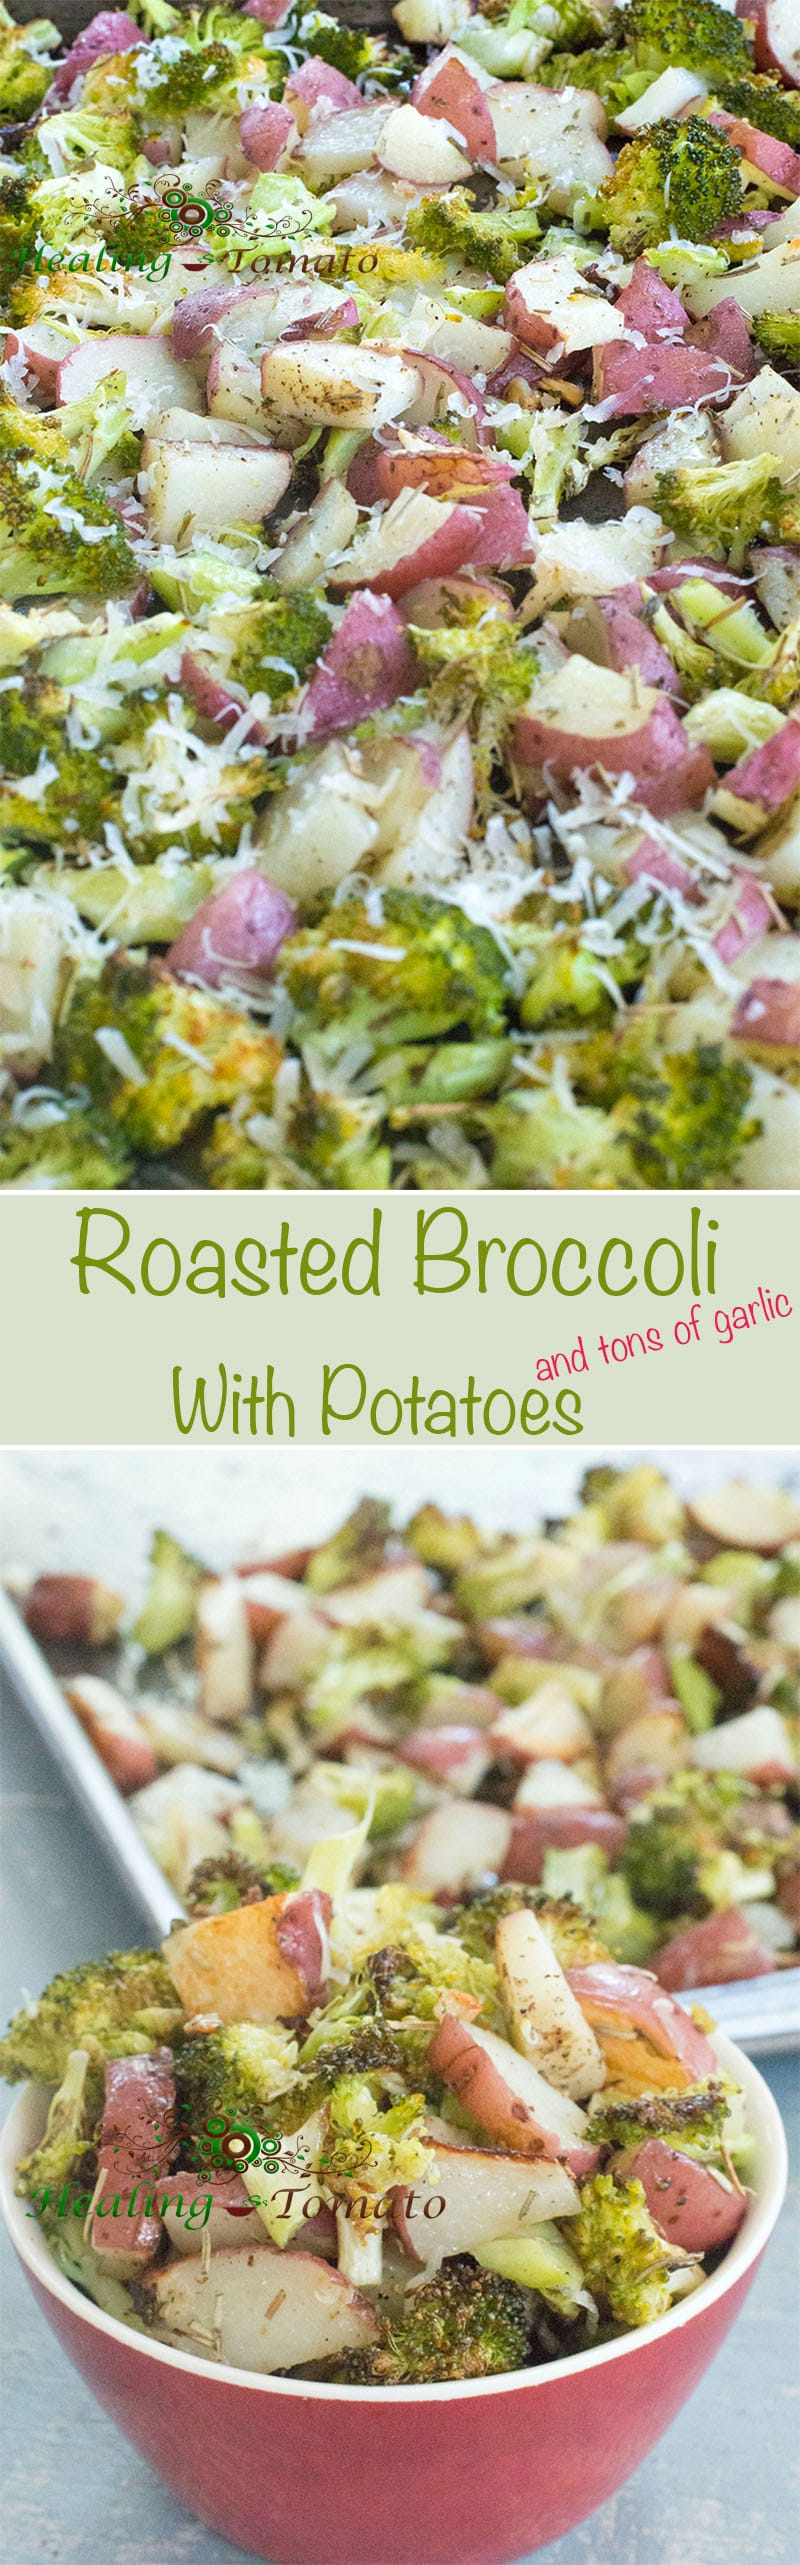 Roasted Broccoli and potatoes are a very simple combo of healthy and comfort food. They are roasted with tons of garlic, oregano, parsley, thyme and pepper.